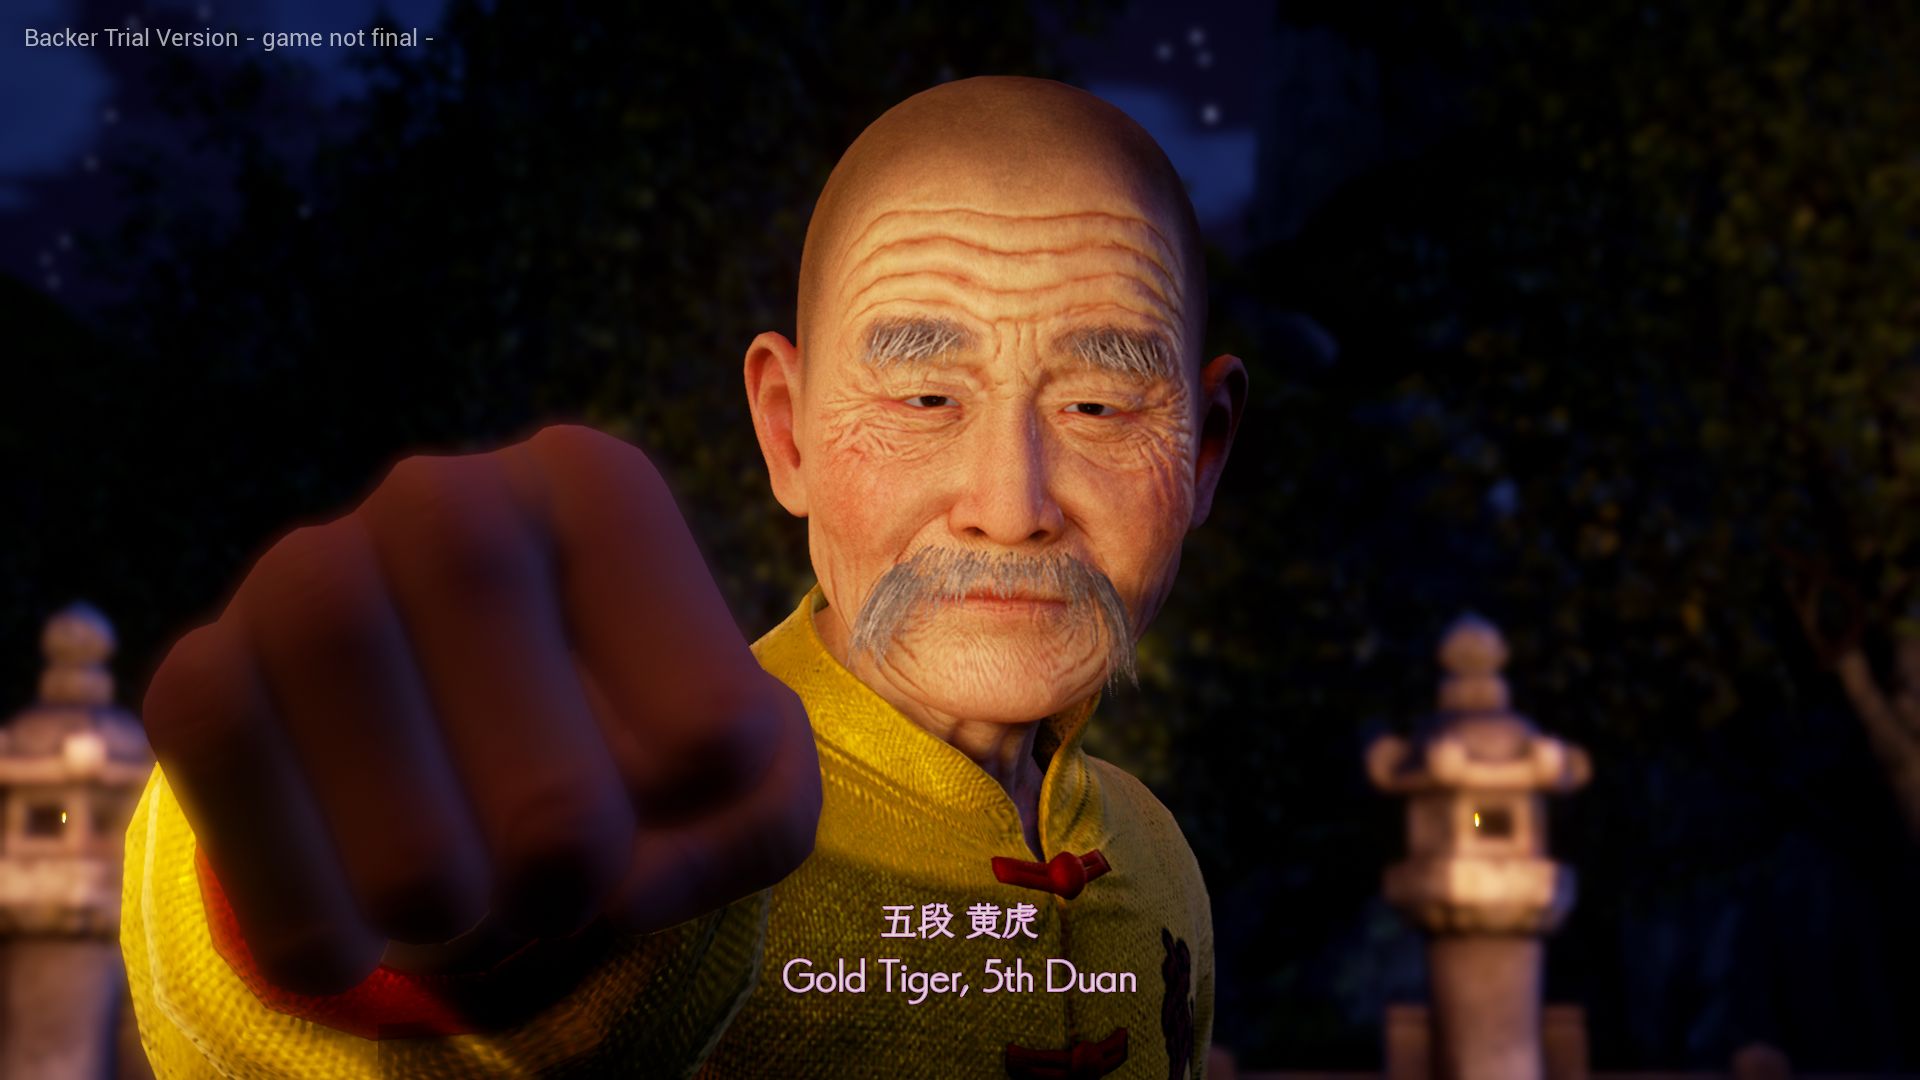 shenmue3-win64-shippixhj11.png